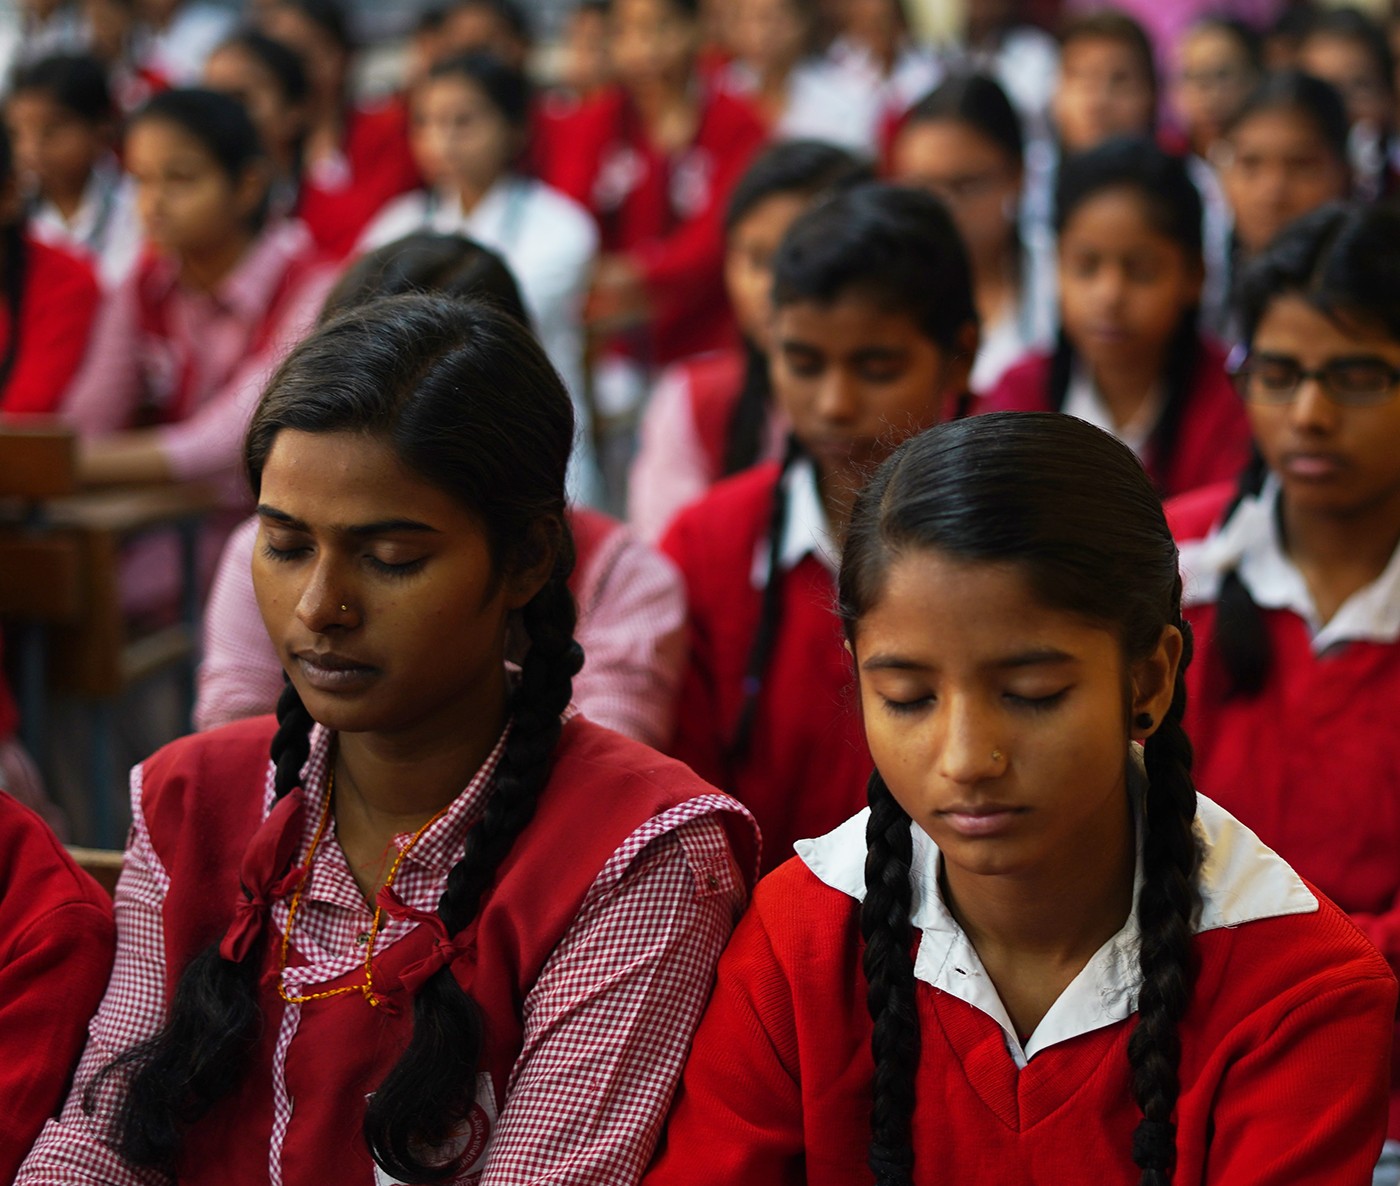 Group of young women dressed in red uniforms at a school in New Delhi.